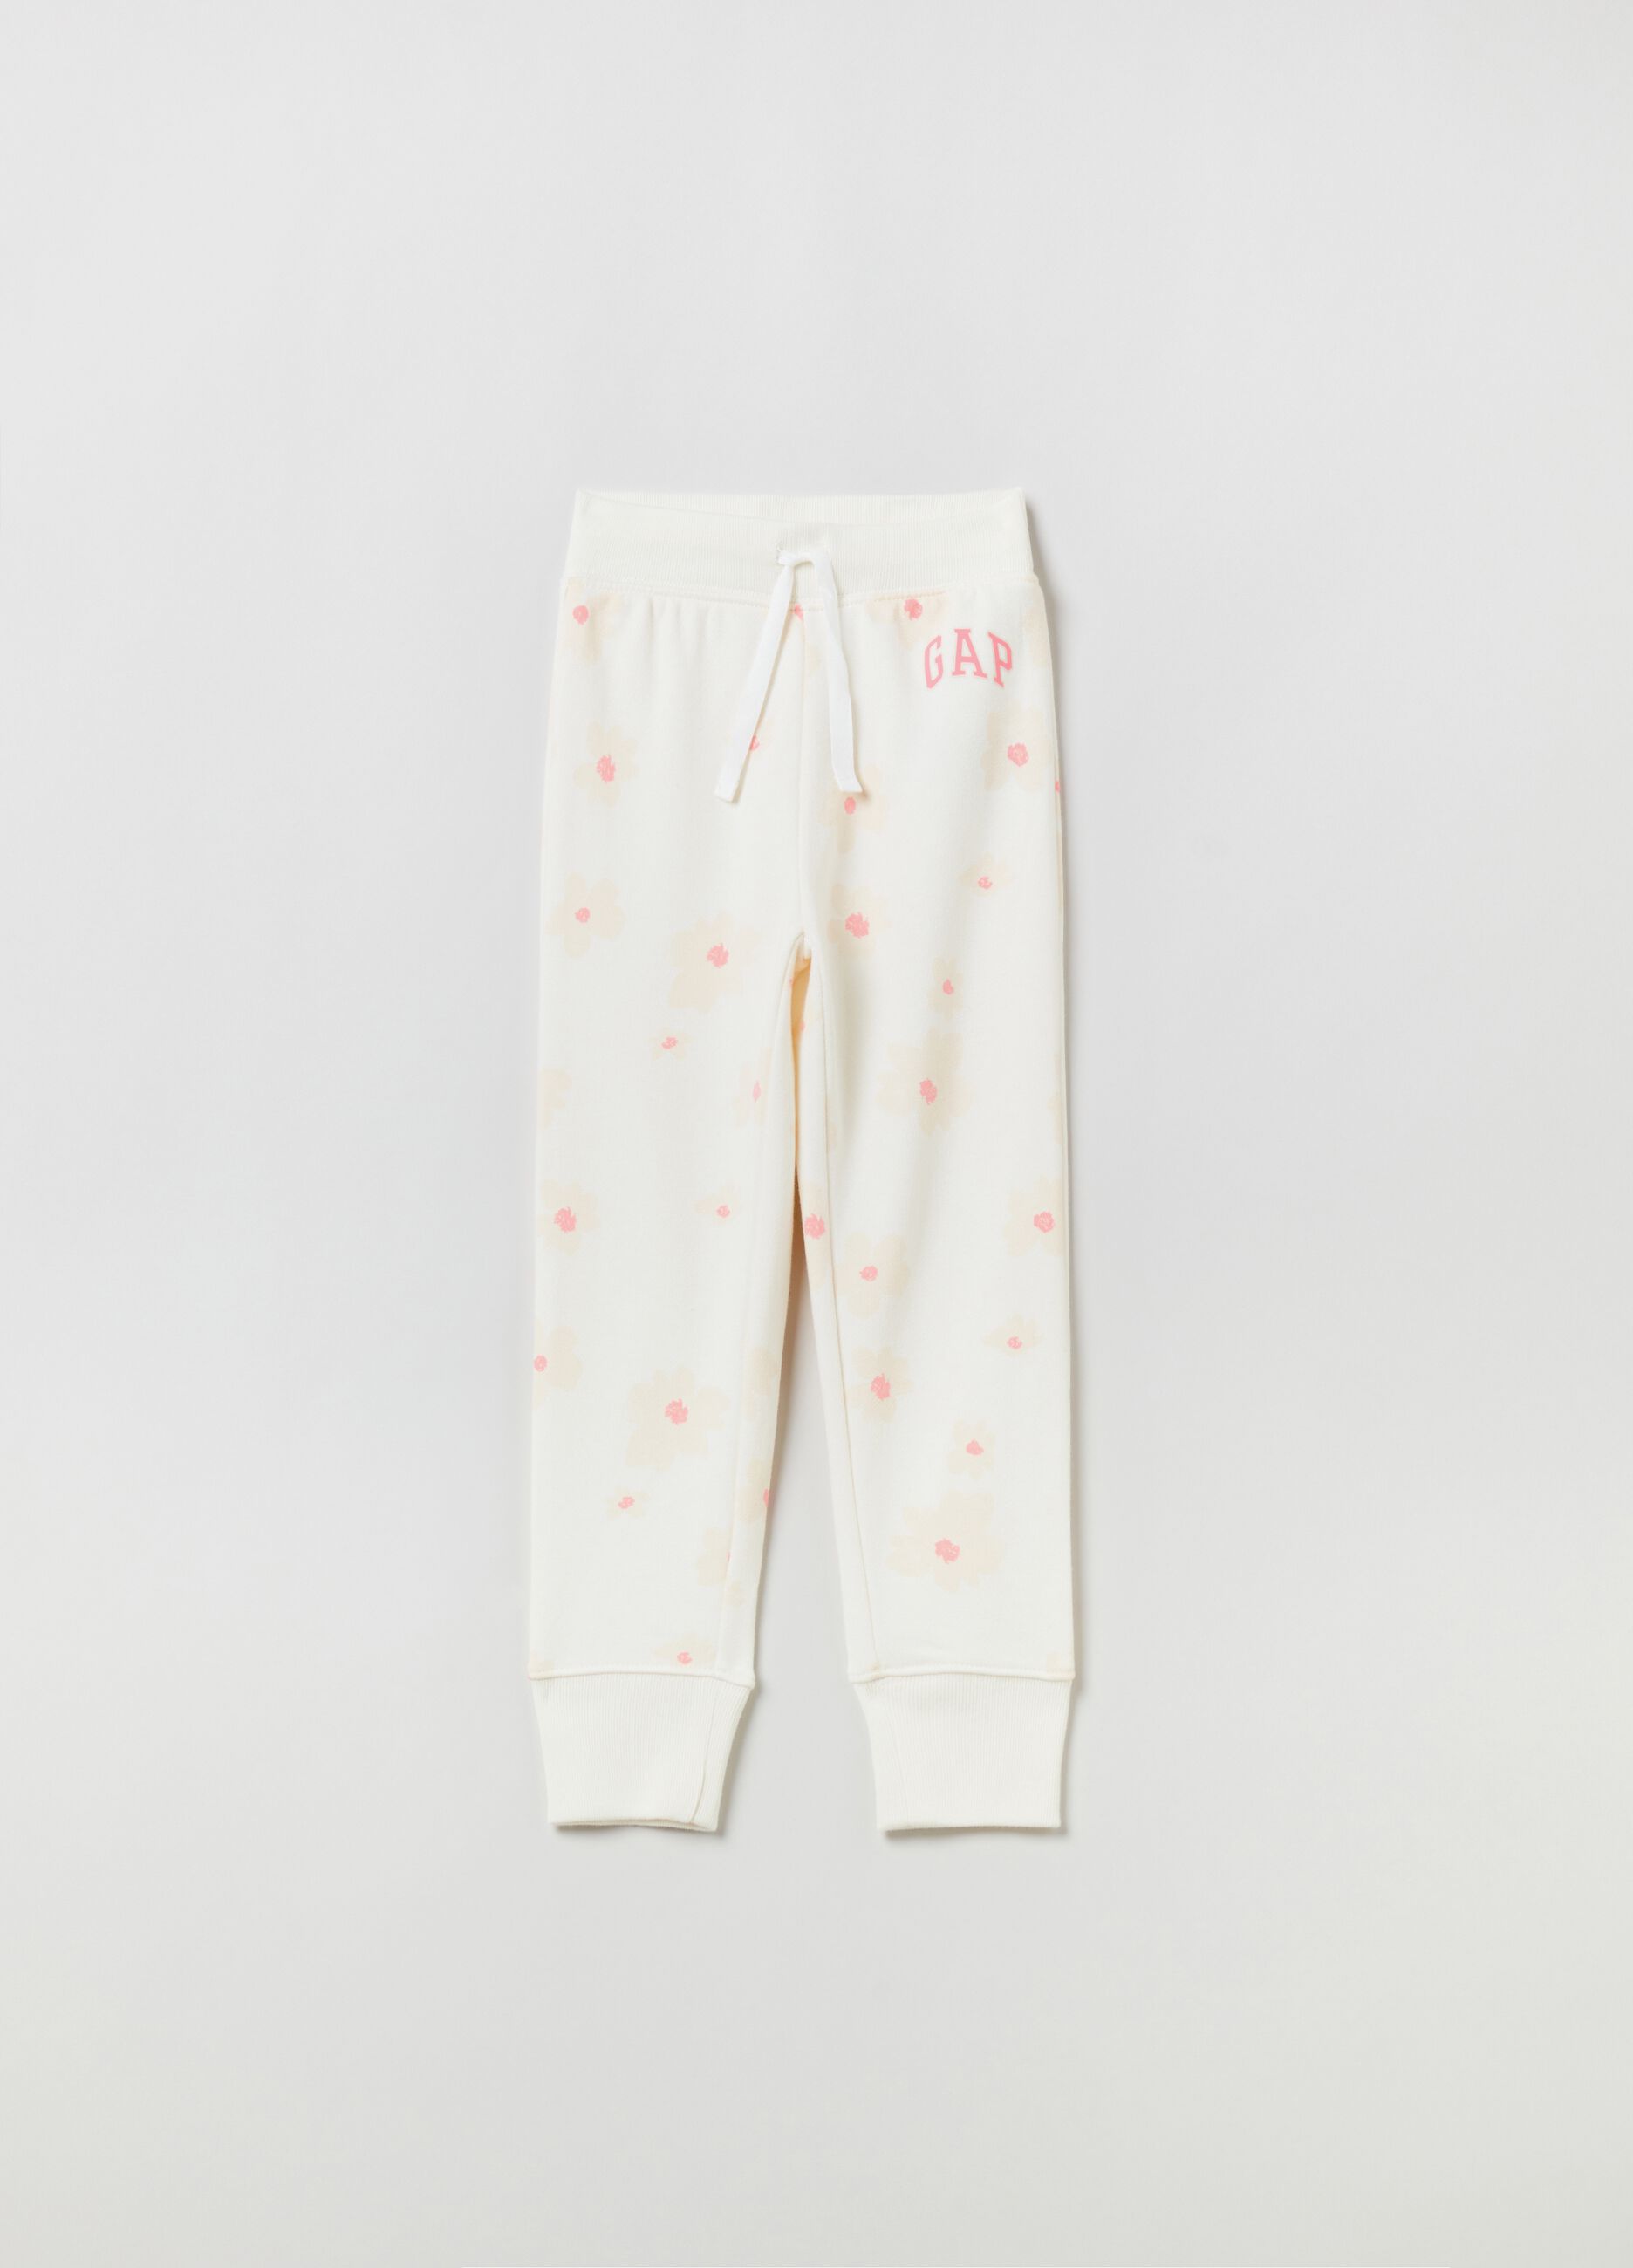 Joggers with floral print, logo and drawstring.